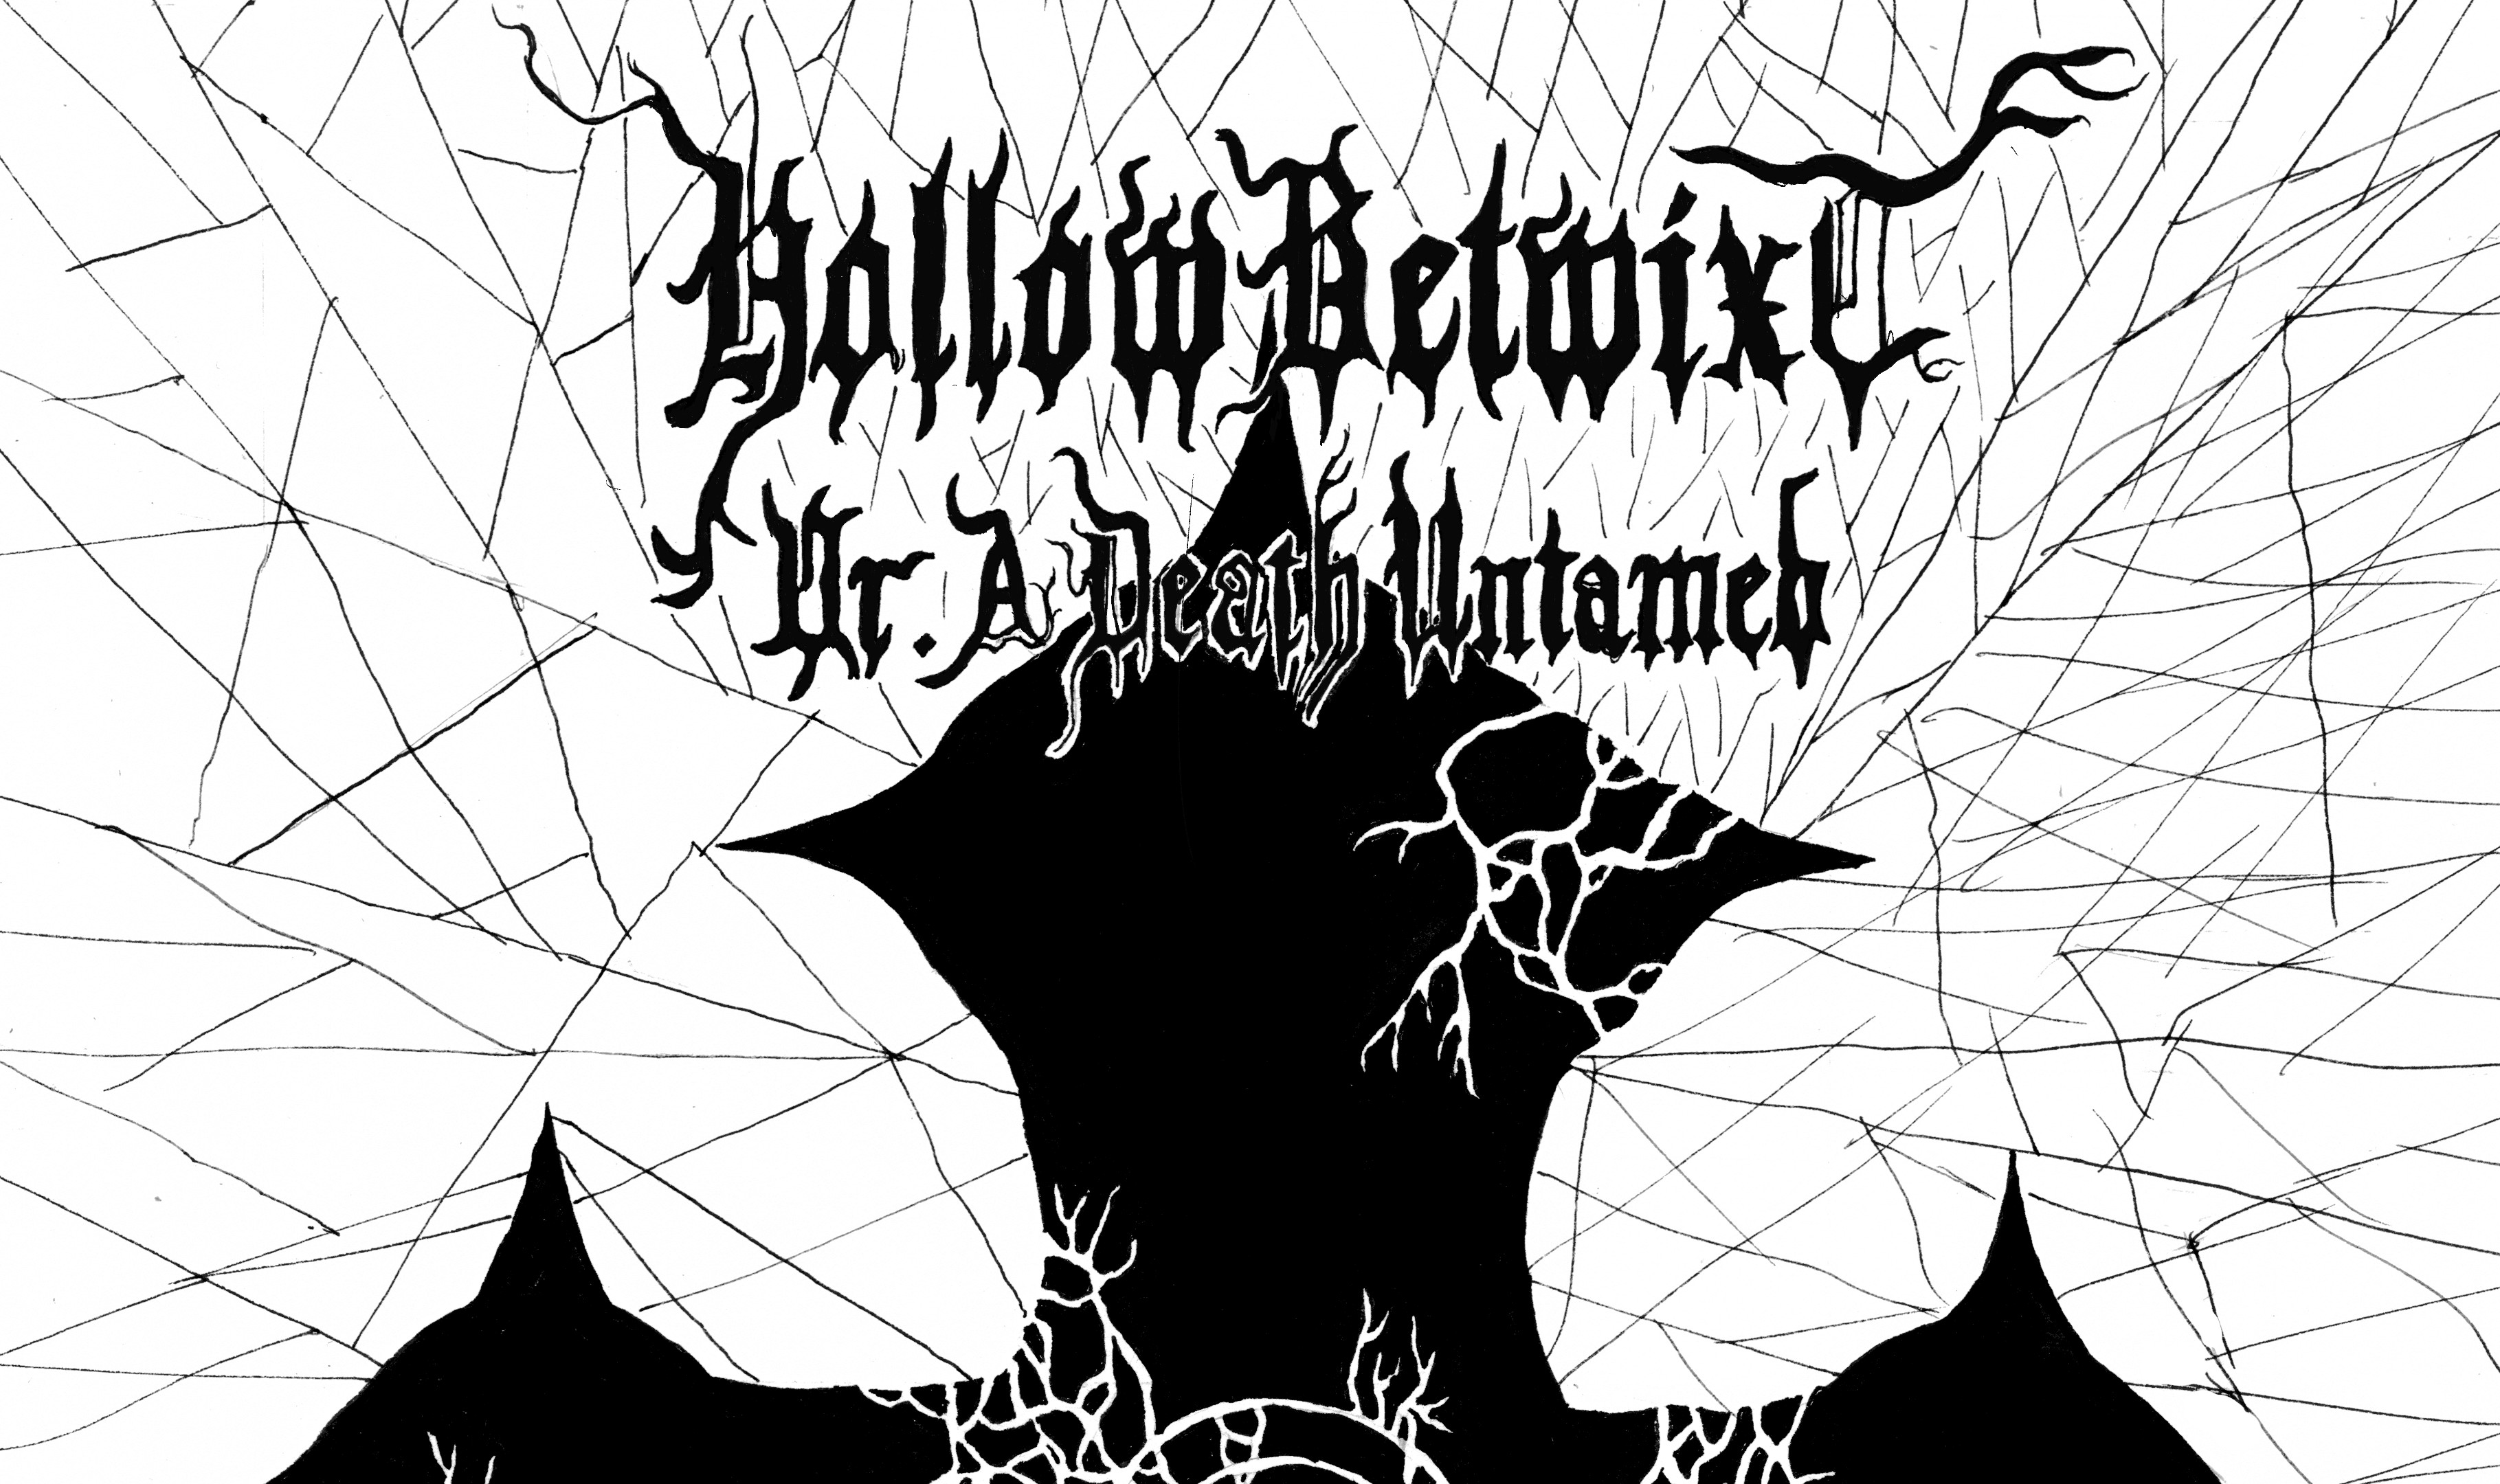 HOLLOW BETWIXT, Or A Death Untamed - A Digital Poetry Zine